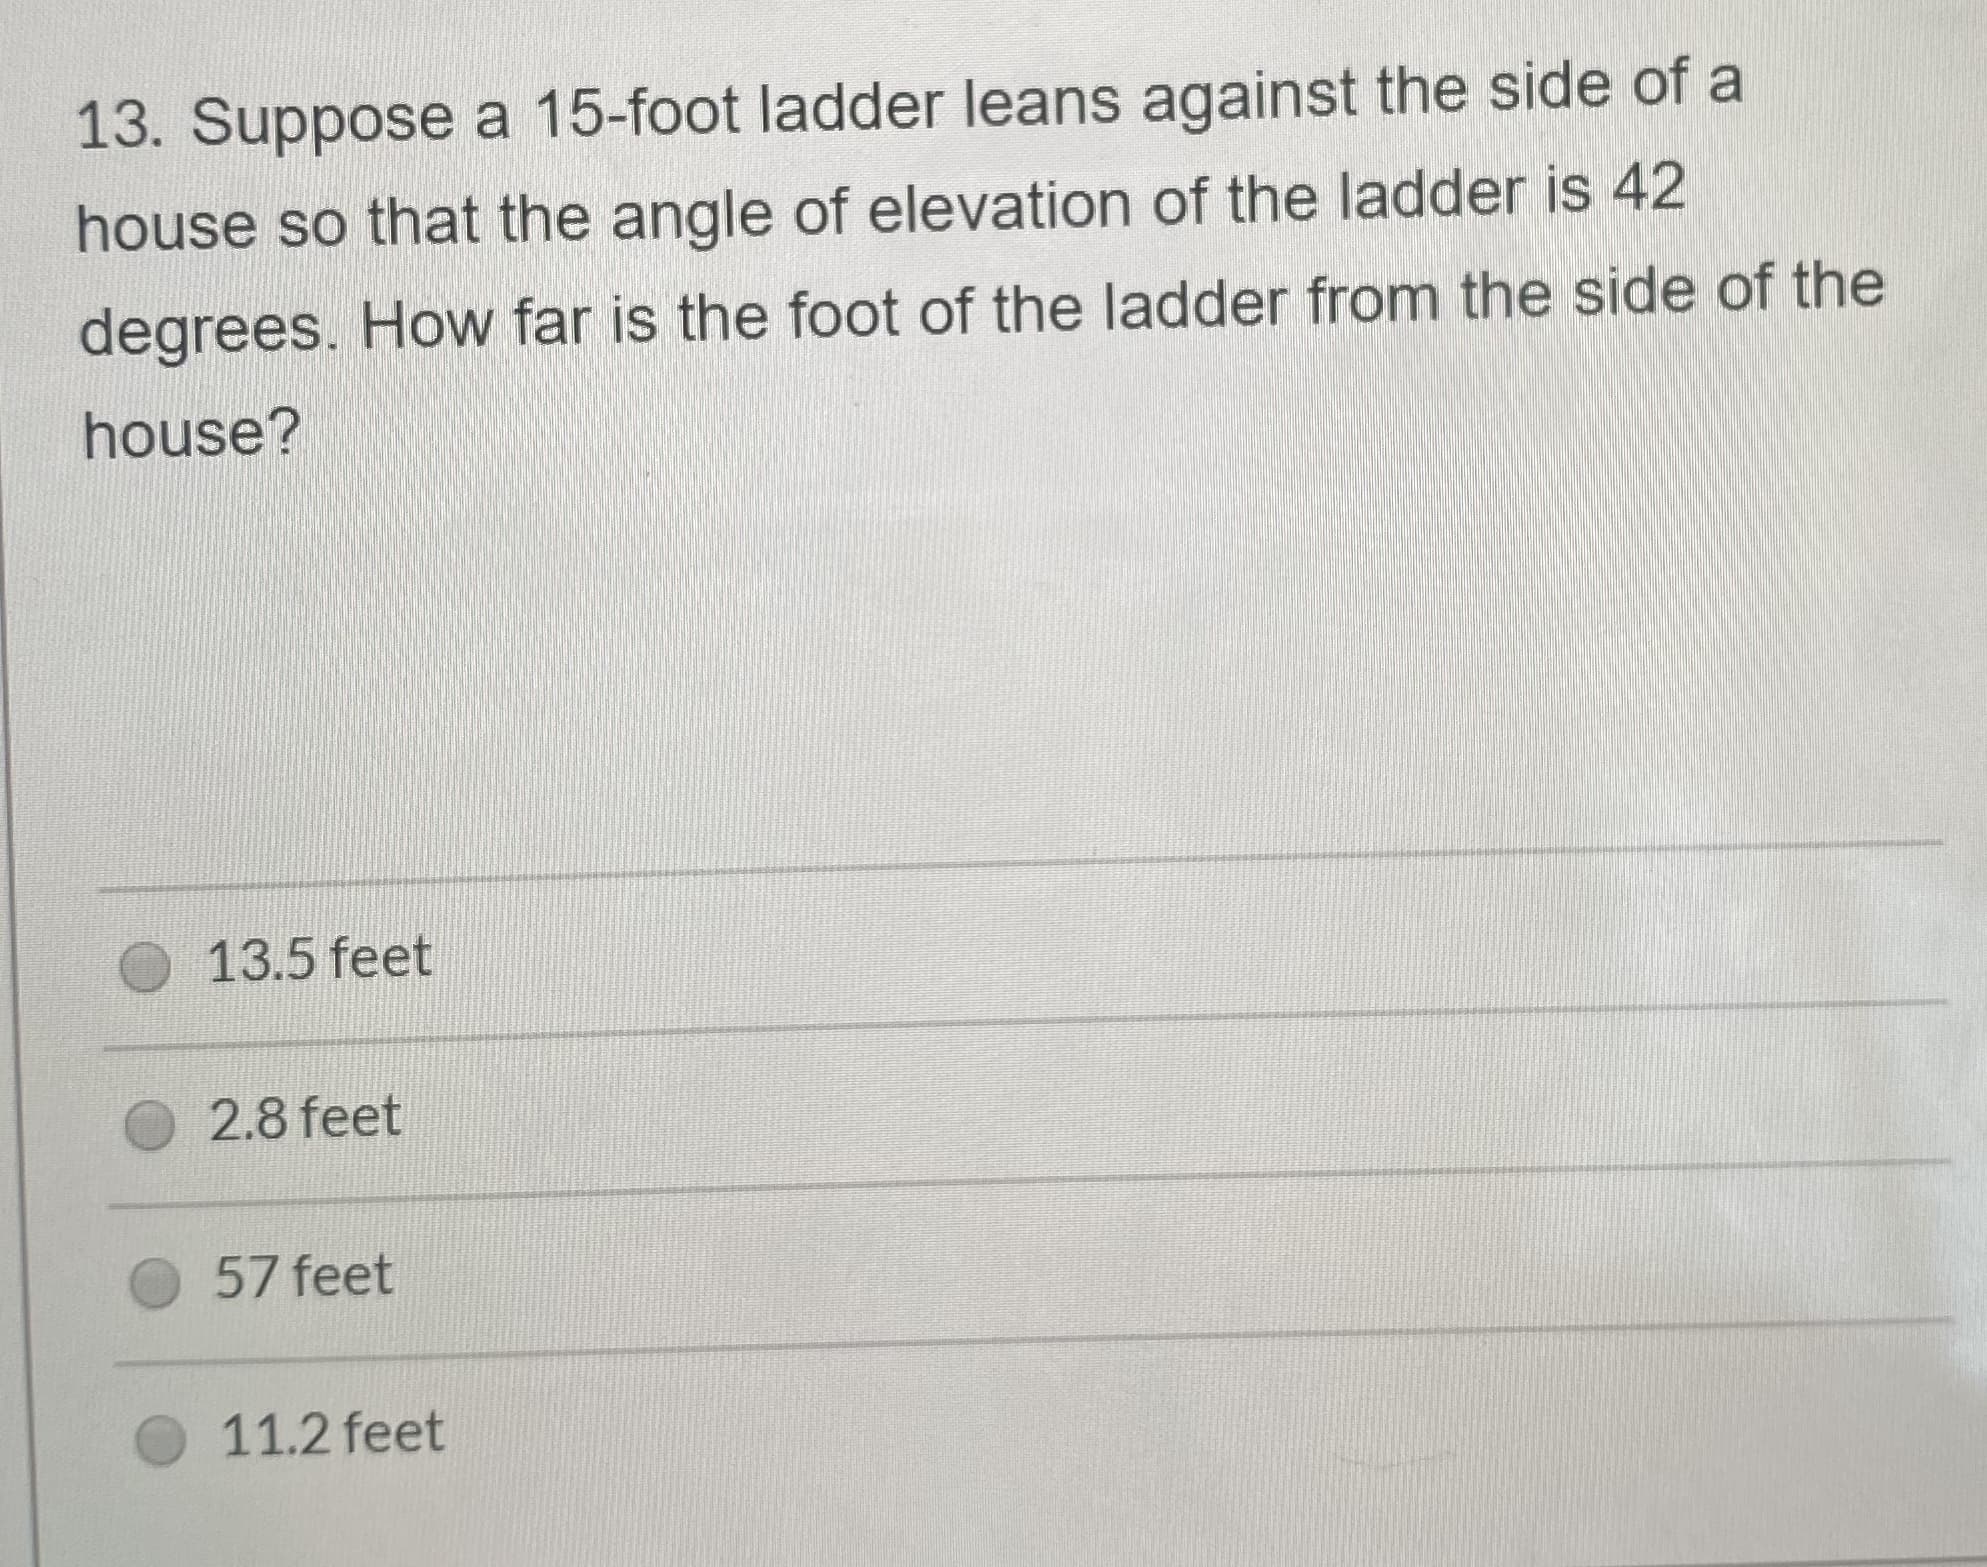 13. Suppose a 15-foot ladder leans against the side of a
house so that the angle of elevation of the ladder is 42
degrees. How far is the foot of the ladder from the side of the
house?
13.5 feet
2.8 feet
57 feet
11.2 feet
